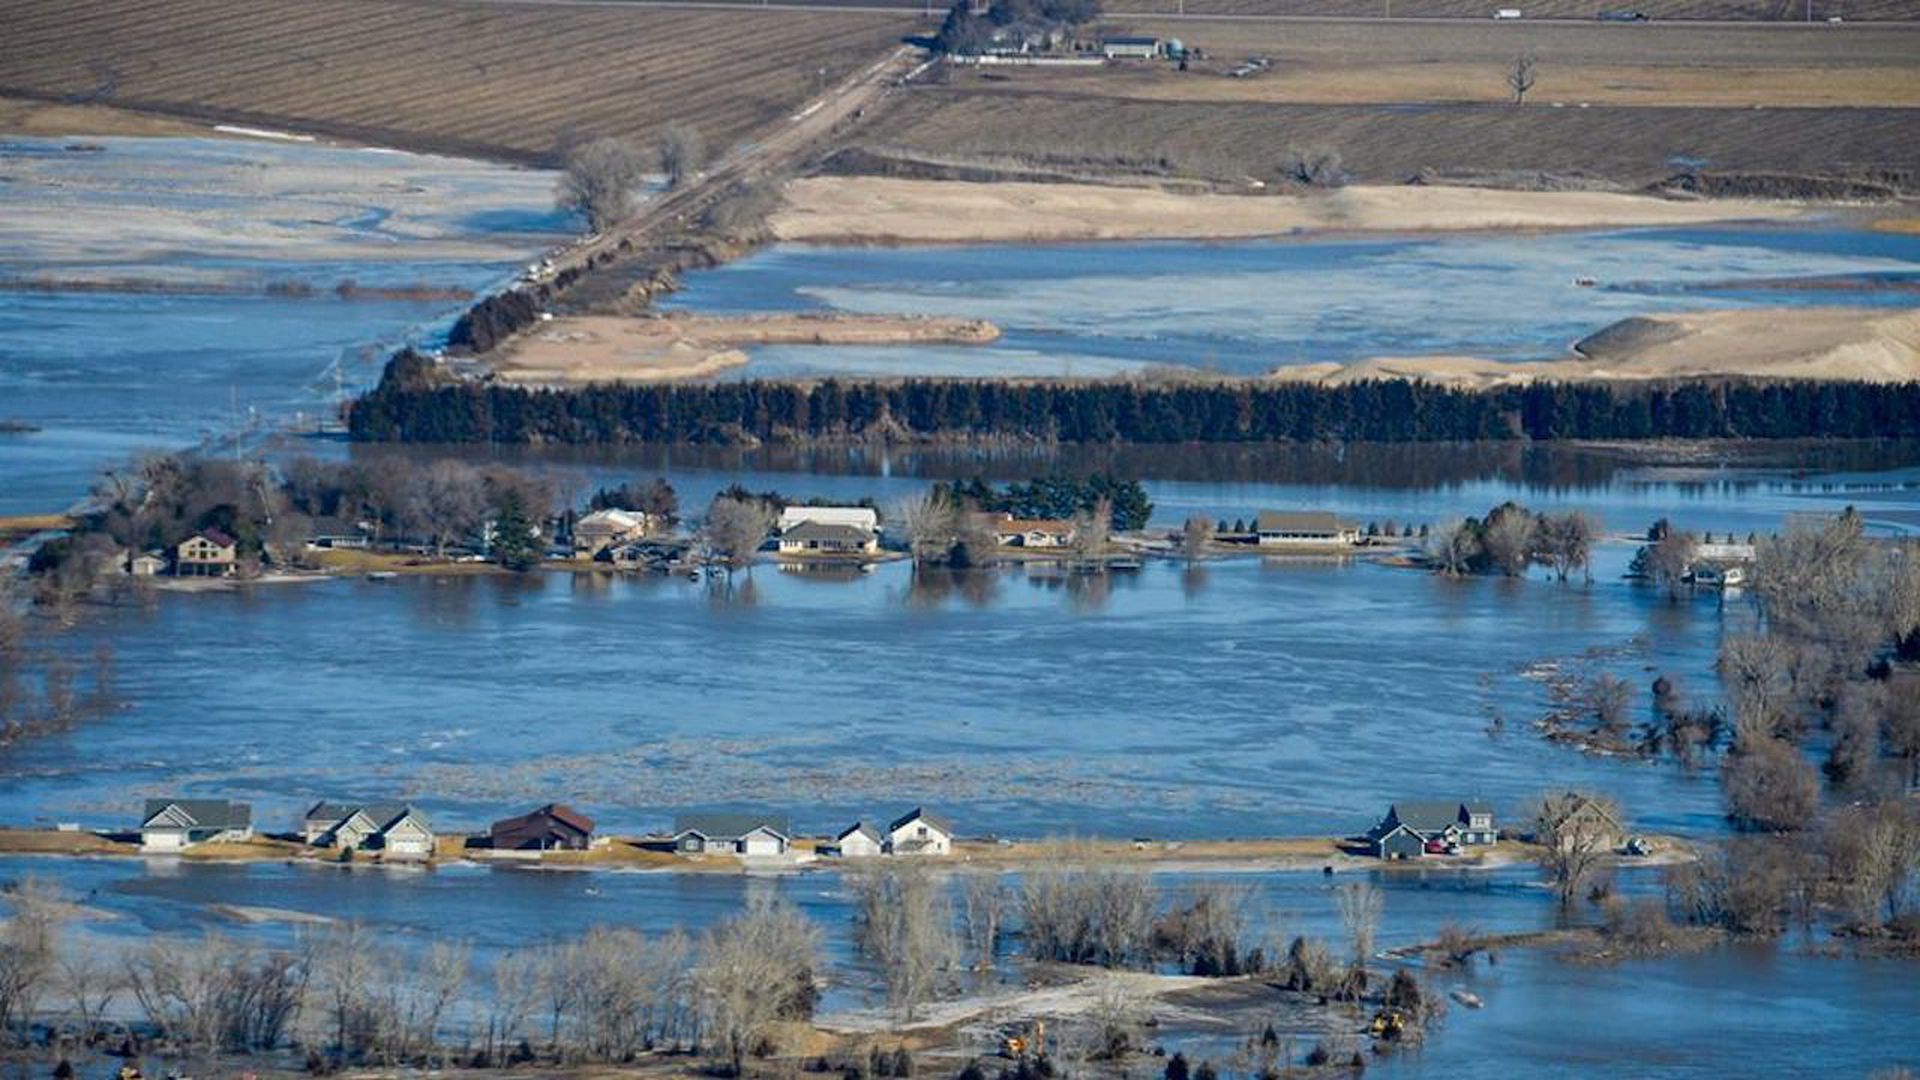 Parts of the Midwest have been devastated by historic floods.